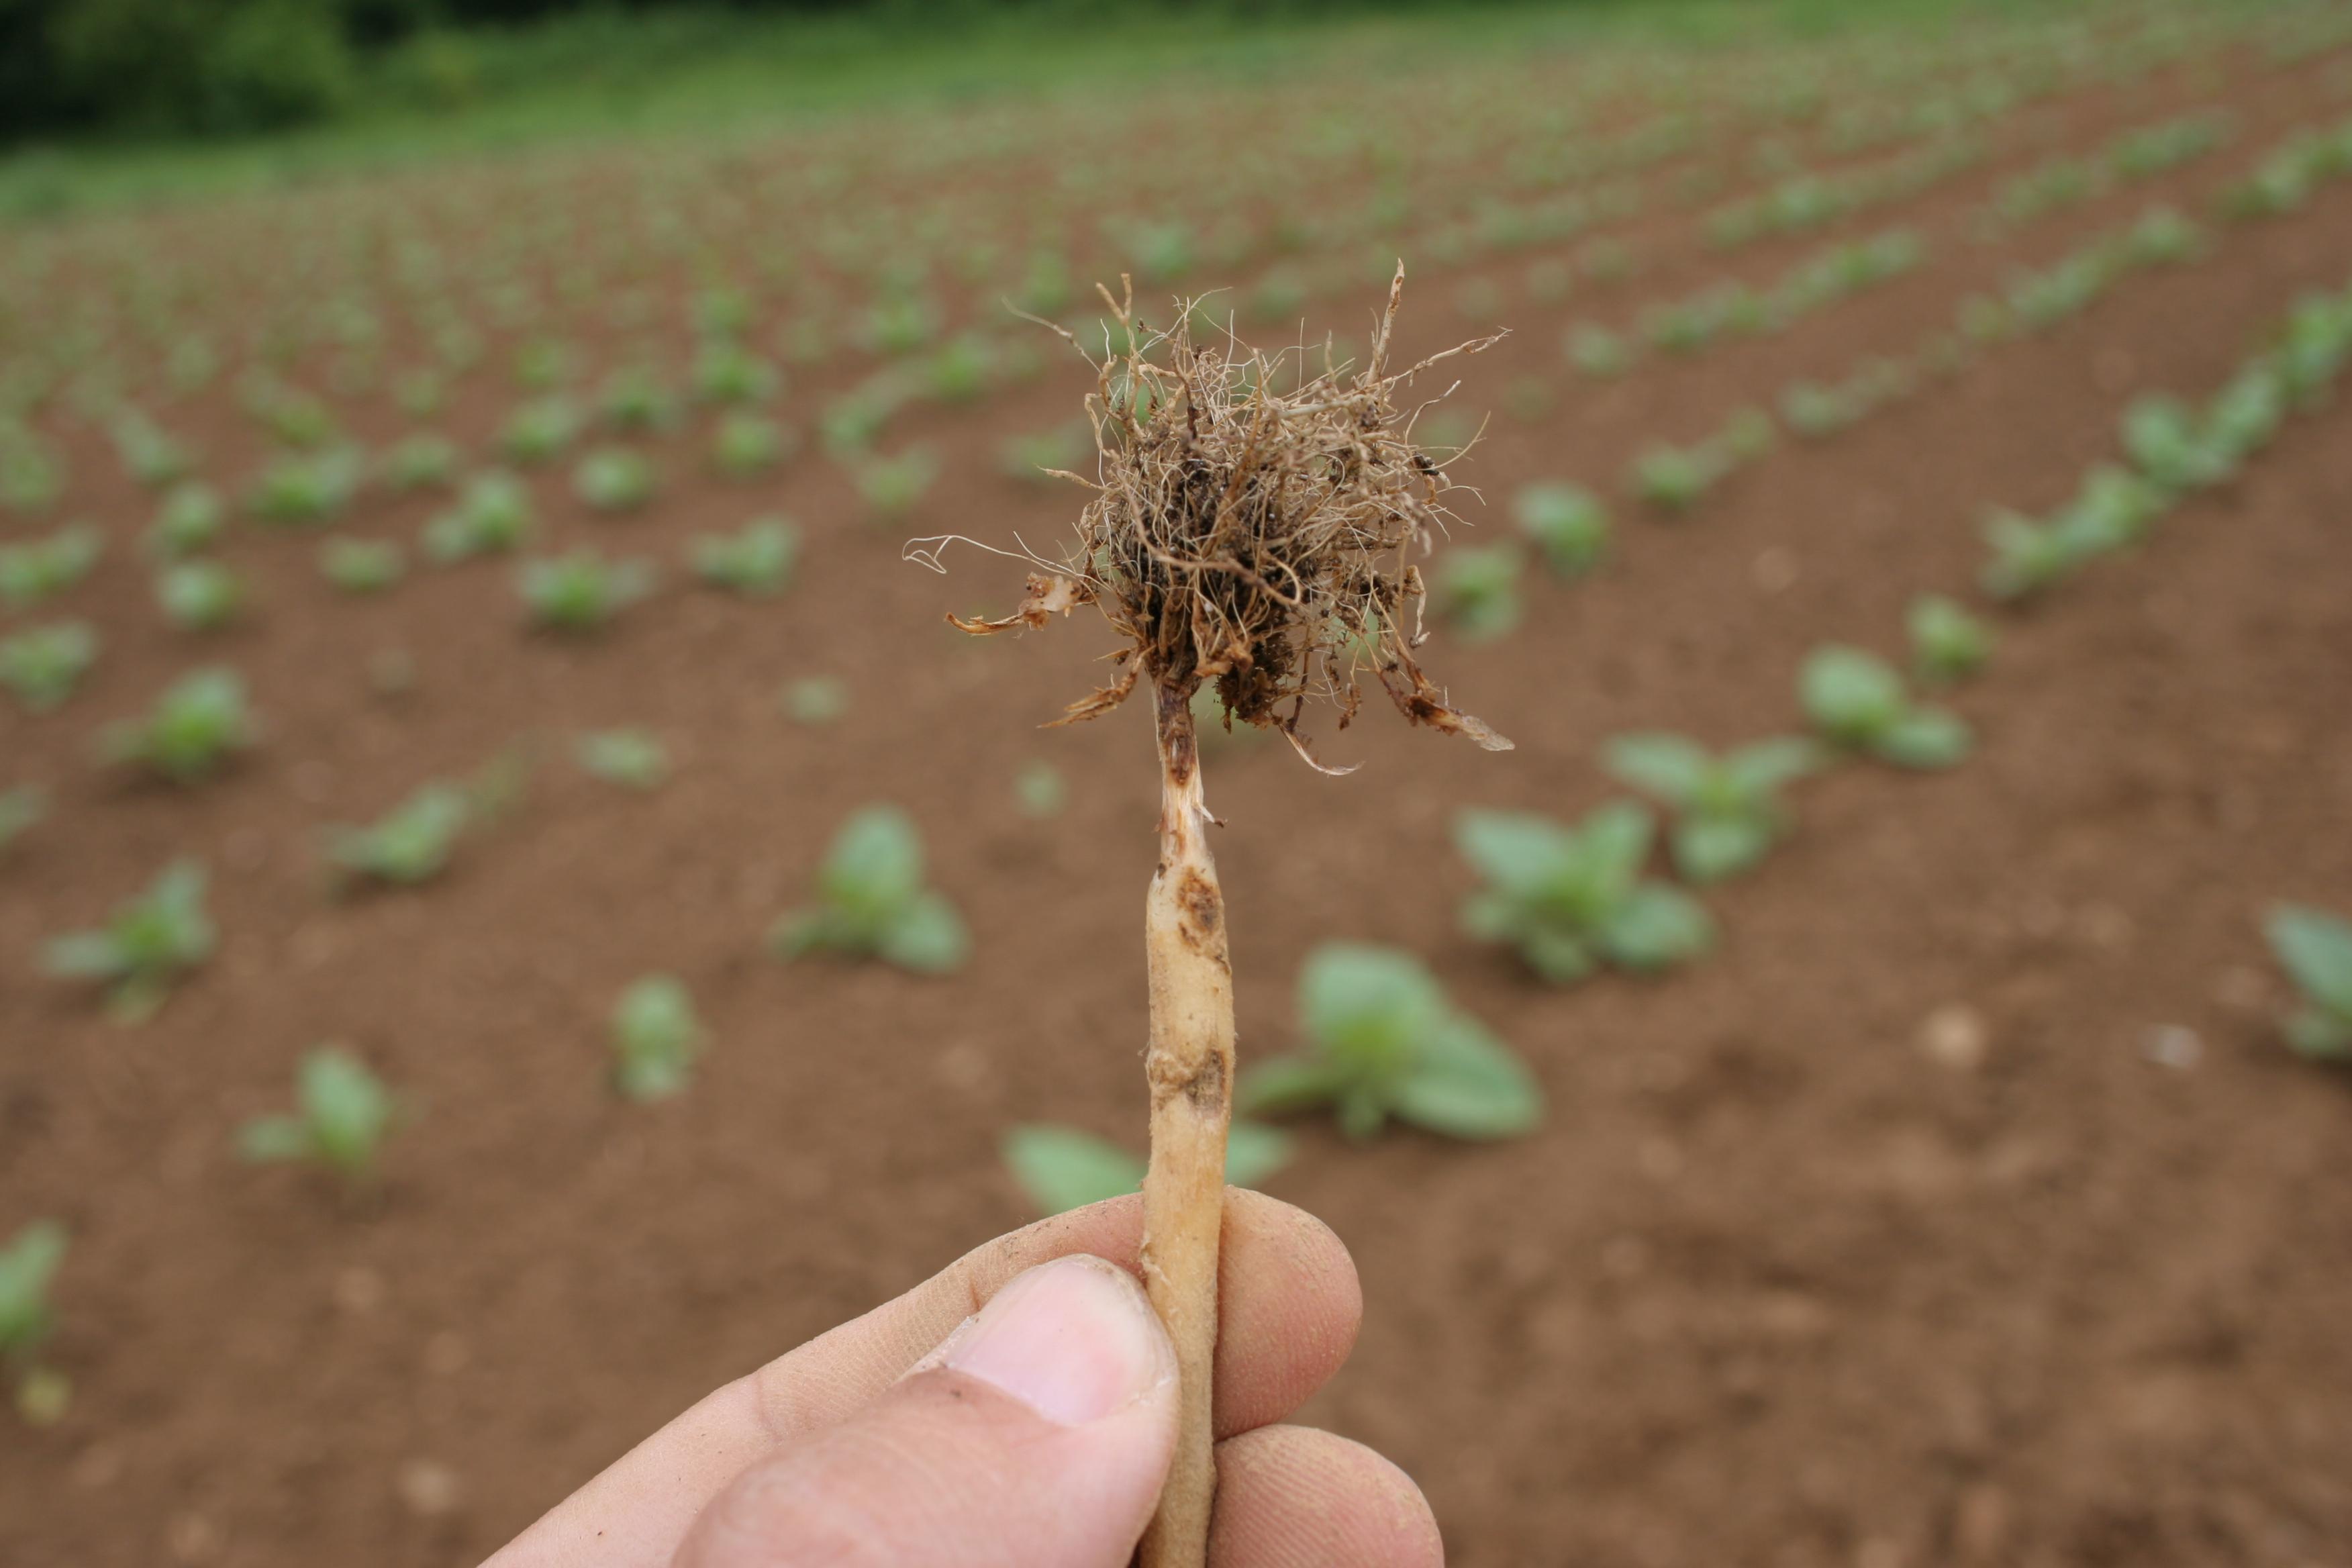 Sore shin is caused by a soil-borne fungus.  This disease may appear on transplants or in field tobacco at any growth stage. Brown to reddish-brown sunken lesions develop on the lower stem at or below the soil line. Depending on the severity of the disease, plants may continue to grow, but become yellow and stunted.  In more serious cases, plants may decline and die, leaving skips in the field.  (Photo: Kenneth Seebold, UK)